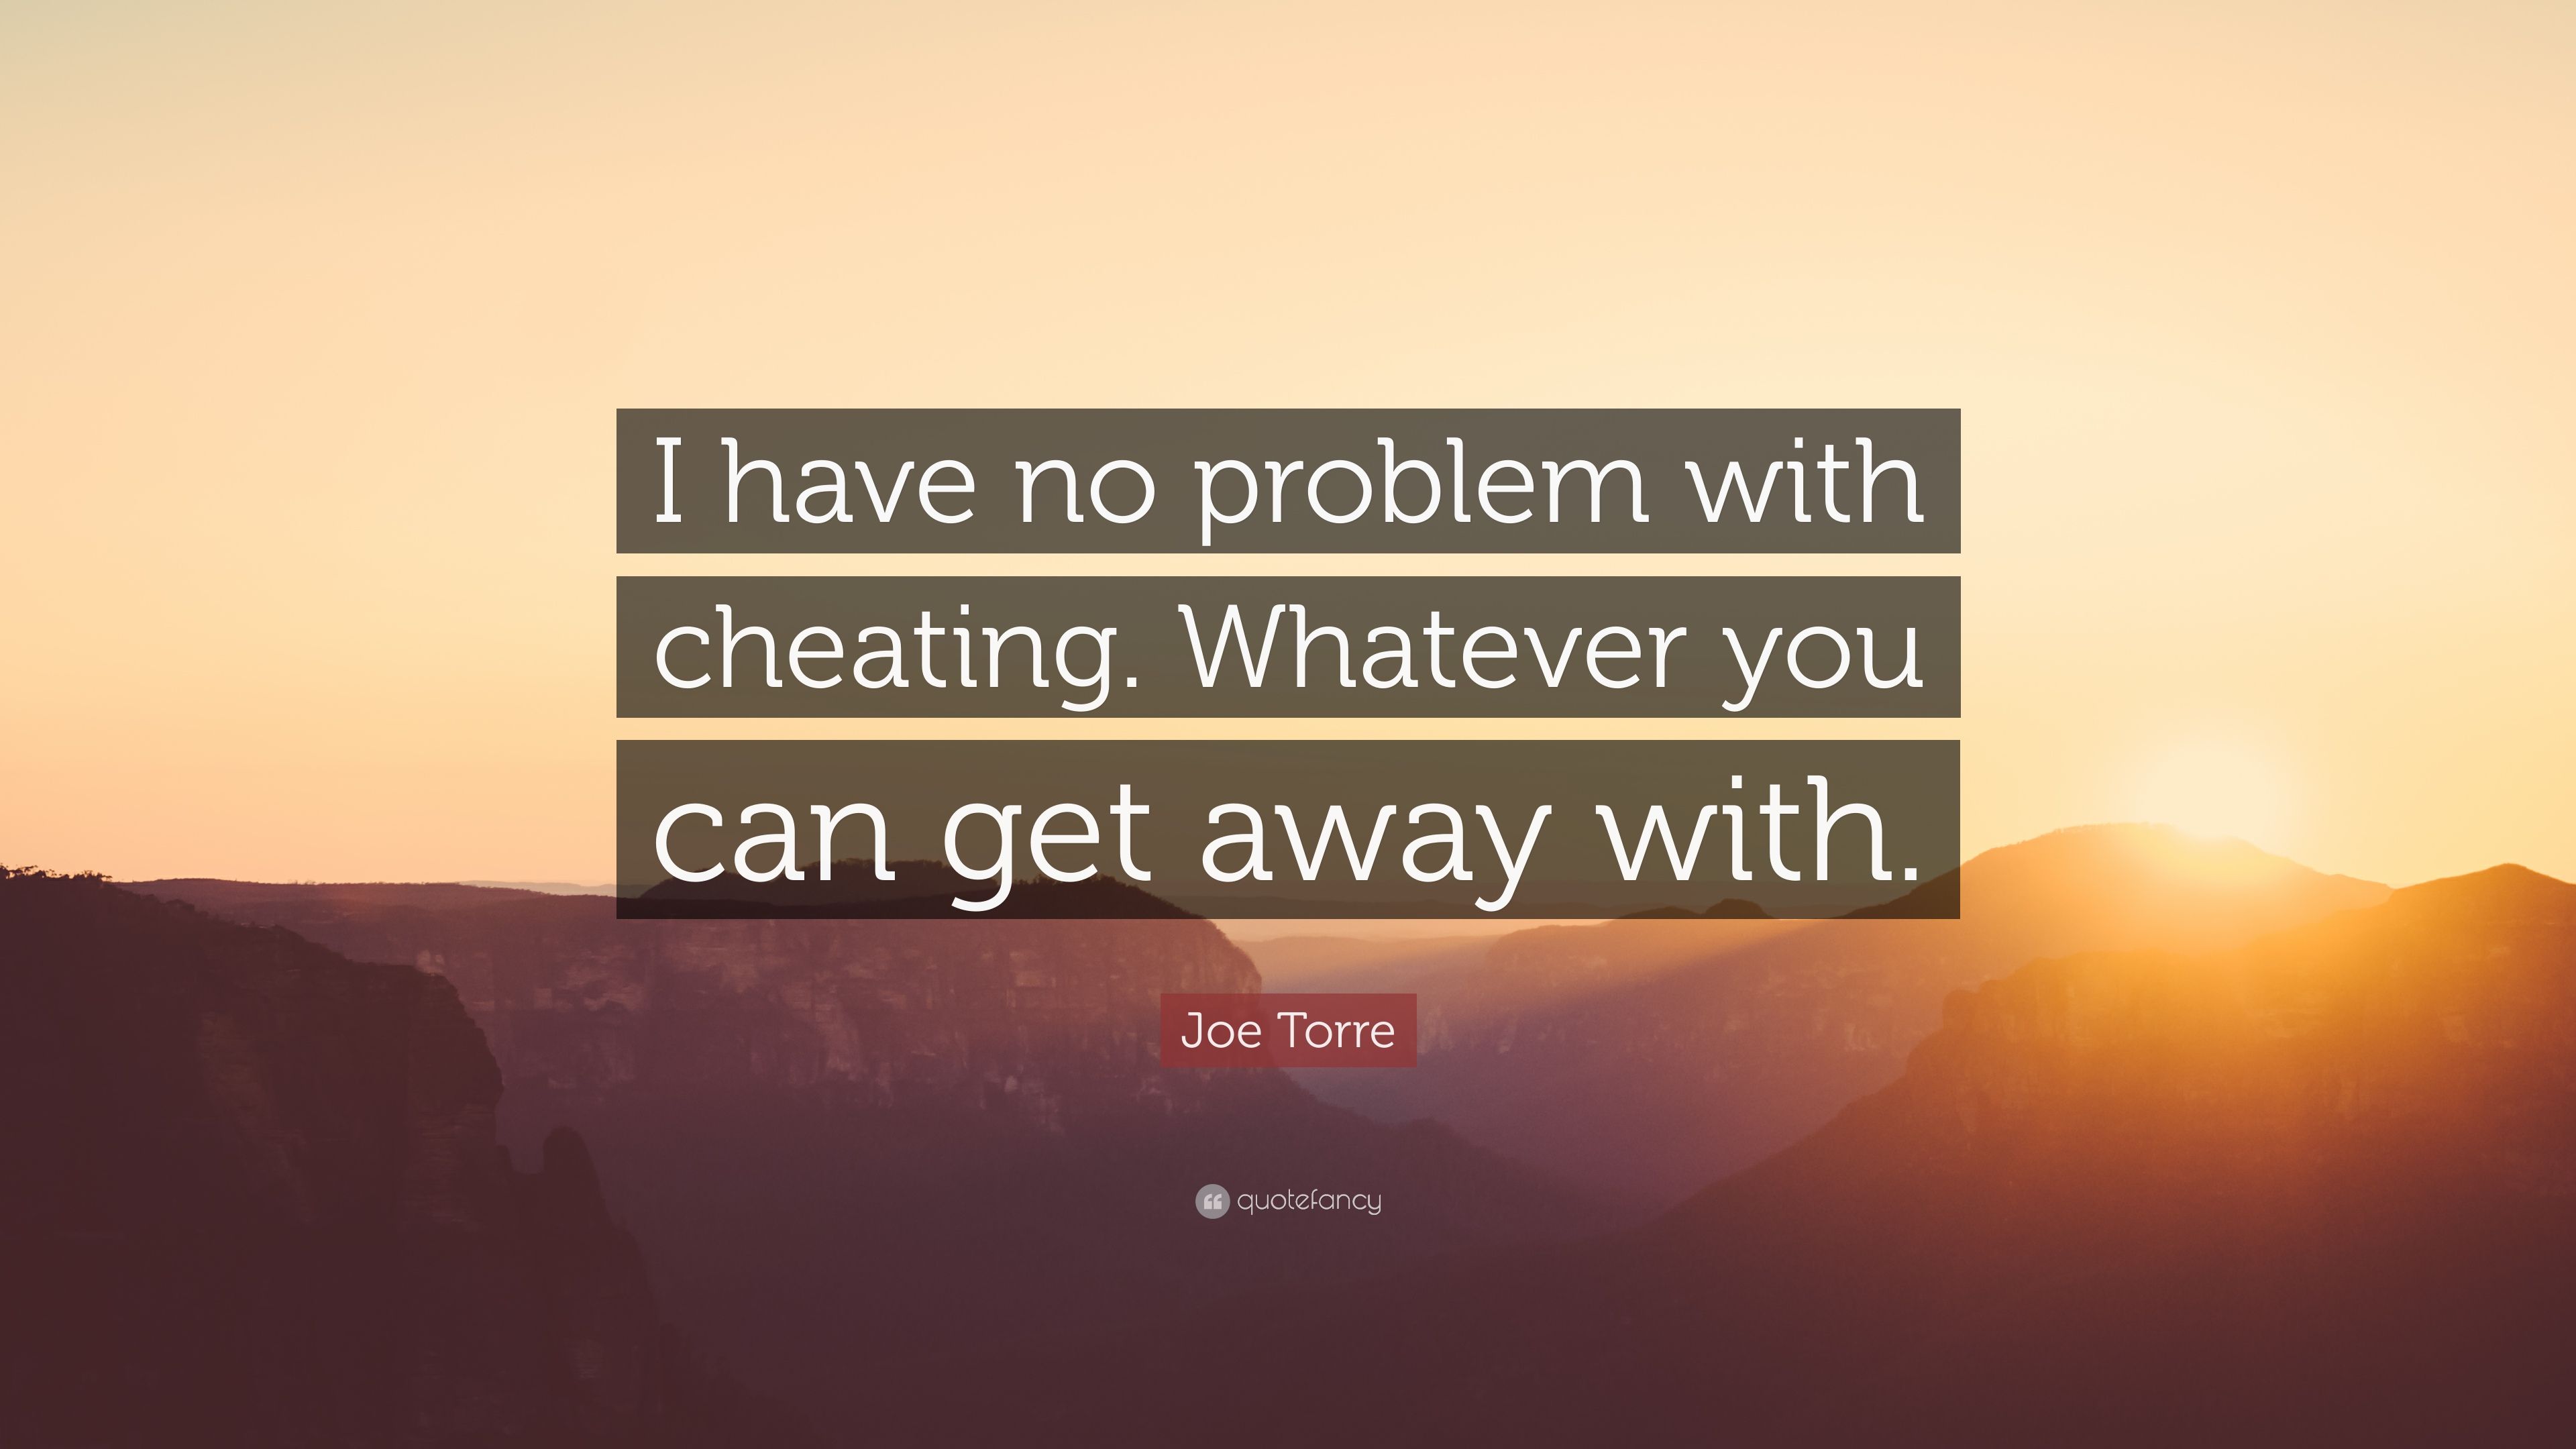 Joe Torre Quote: “I have no problem with cheating. Whatever you can get away with.” (7 wallpaper)